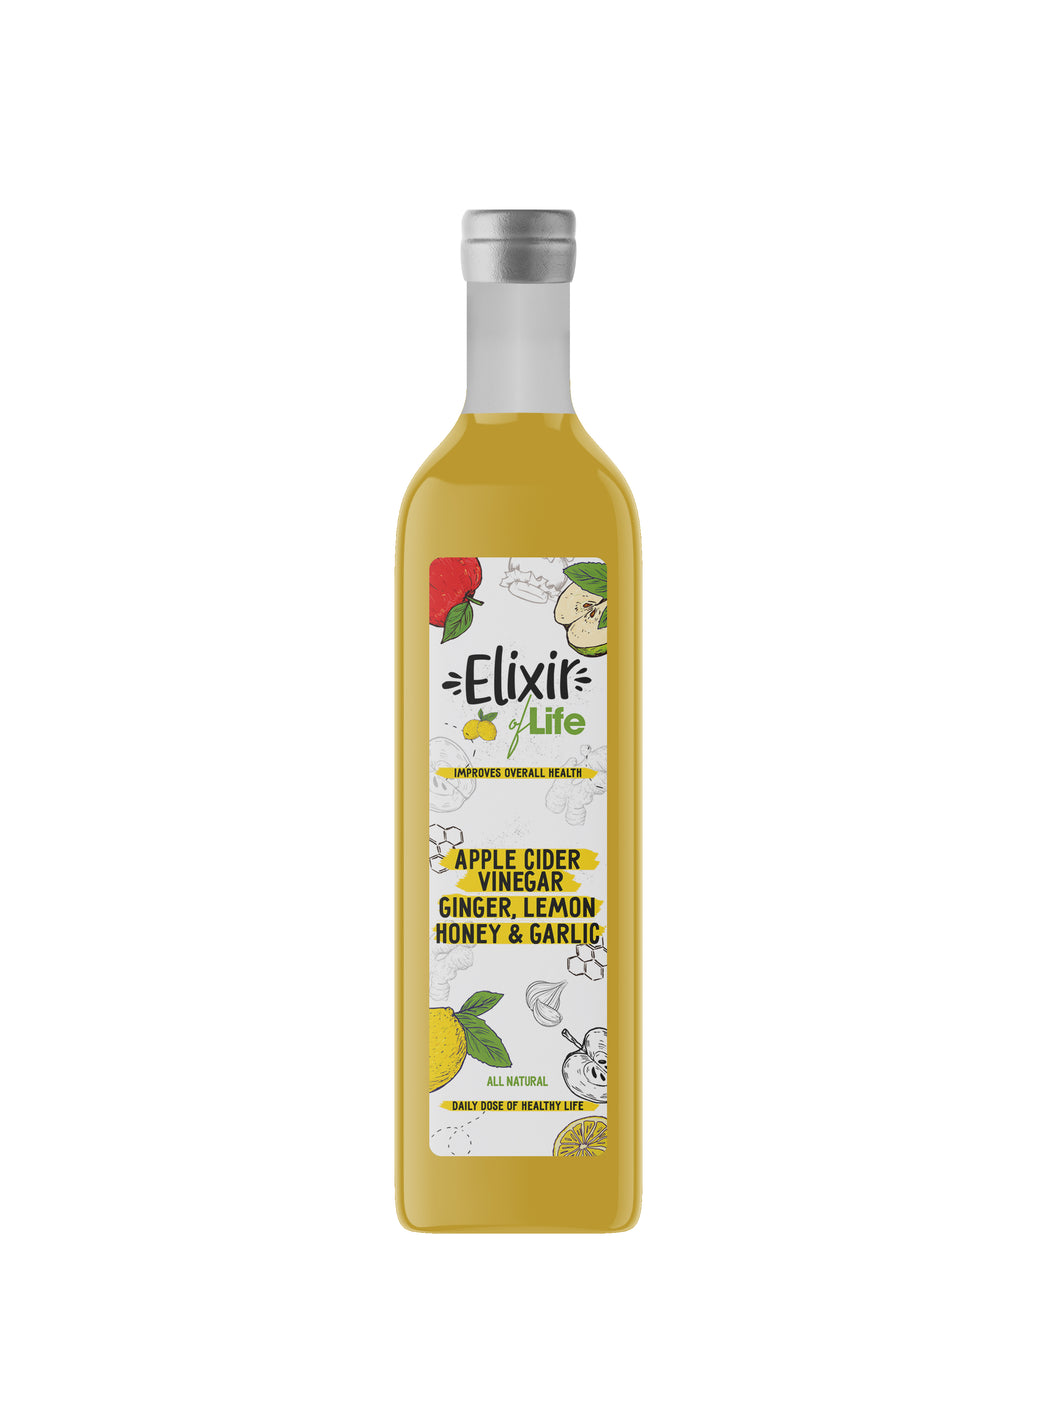 Elixir of Life! Premium Health Booster Packed With Apple Cider Vinegar, Ginger, Honey, Lemon & Garlic - Hand-Crafted, Healthy Natural Drinks 250 ml (16 servings)